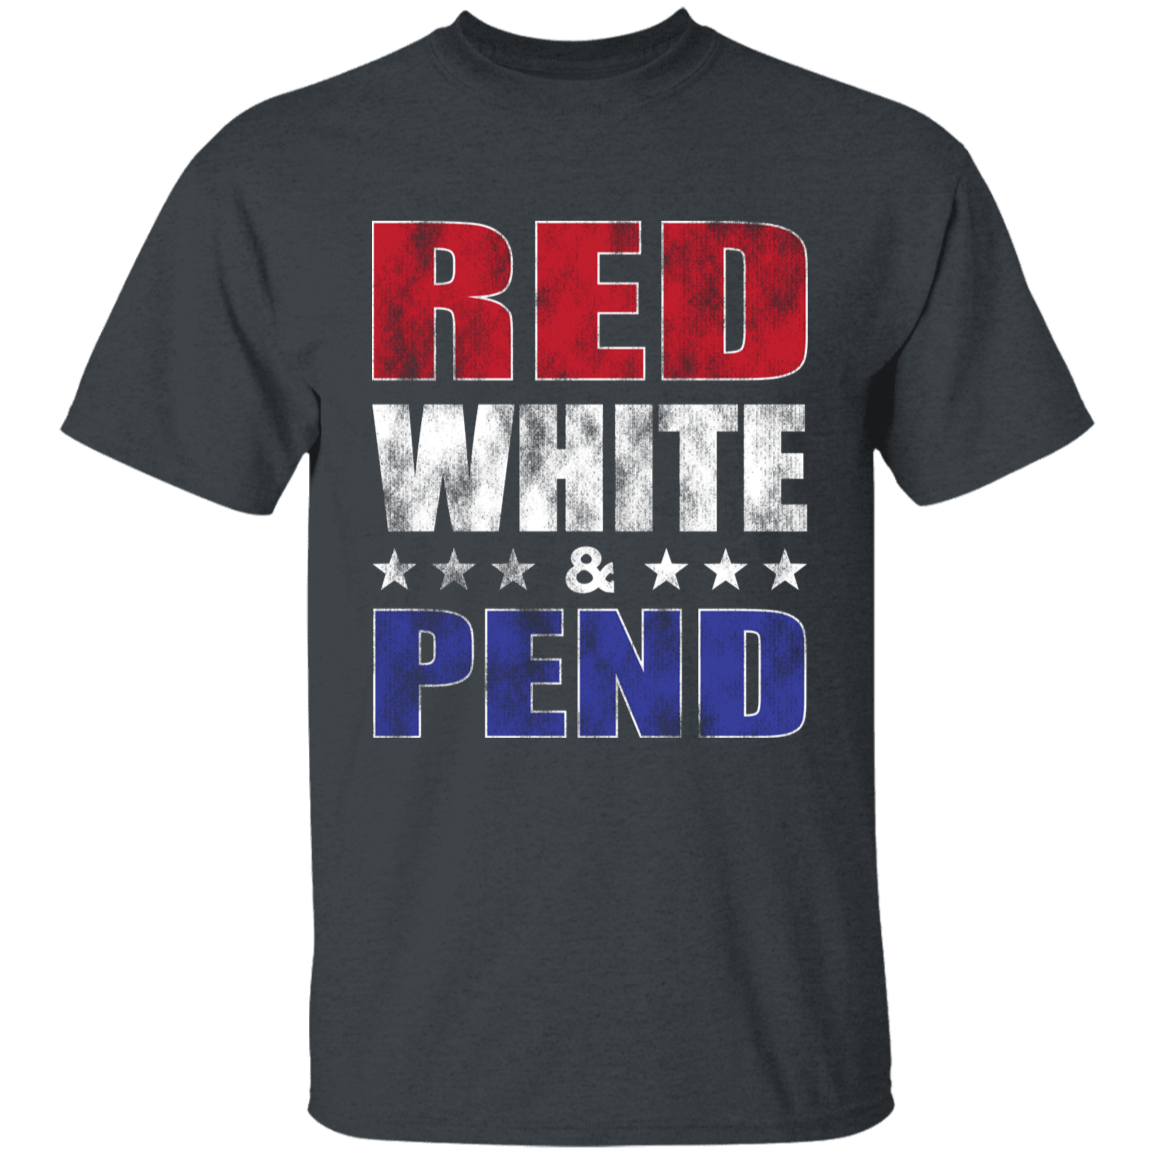 Red White & Pend Youth Shirt